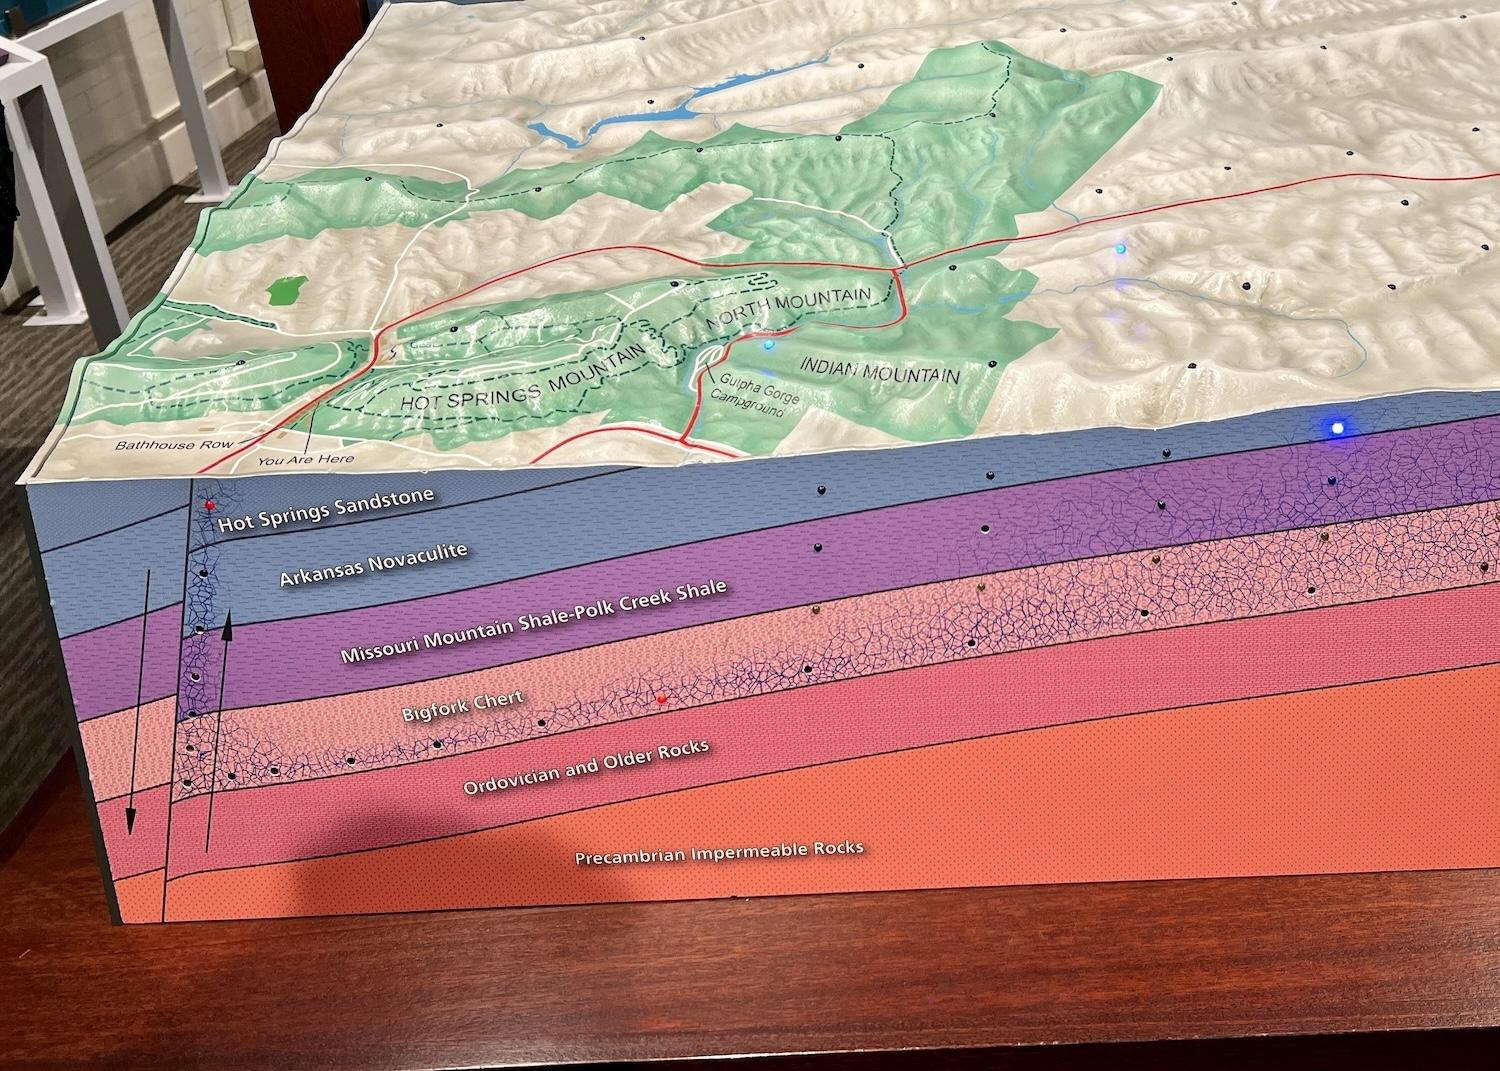 A 3D model shows the irregular boundaries of Hot Springs National Park as it wraps around downtown.